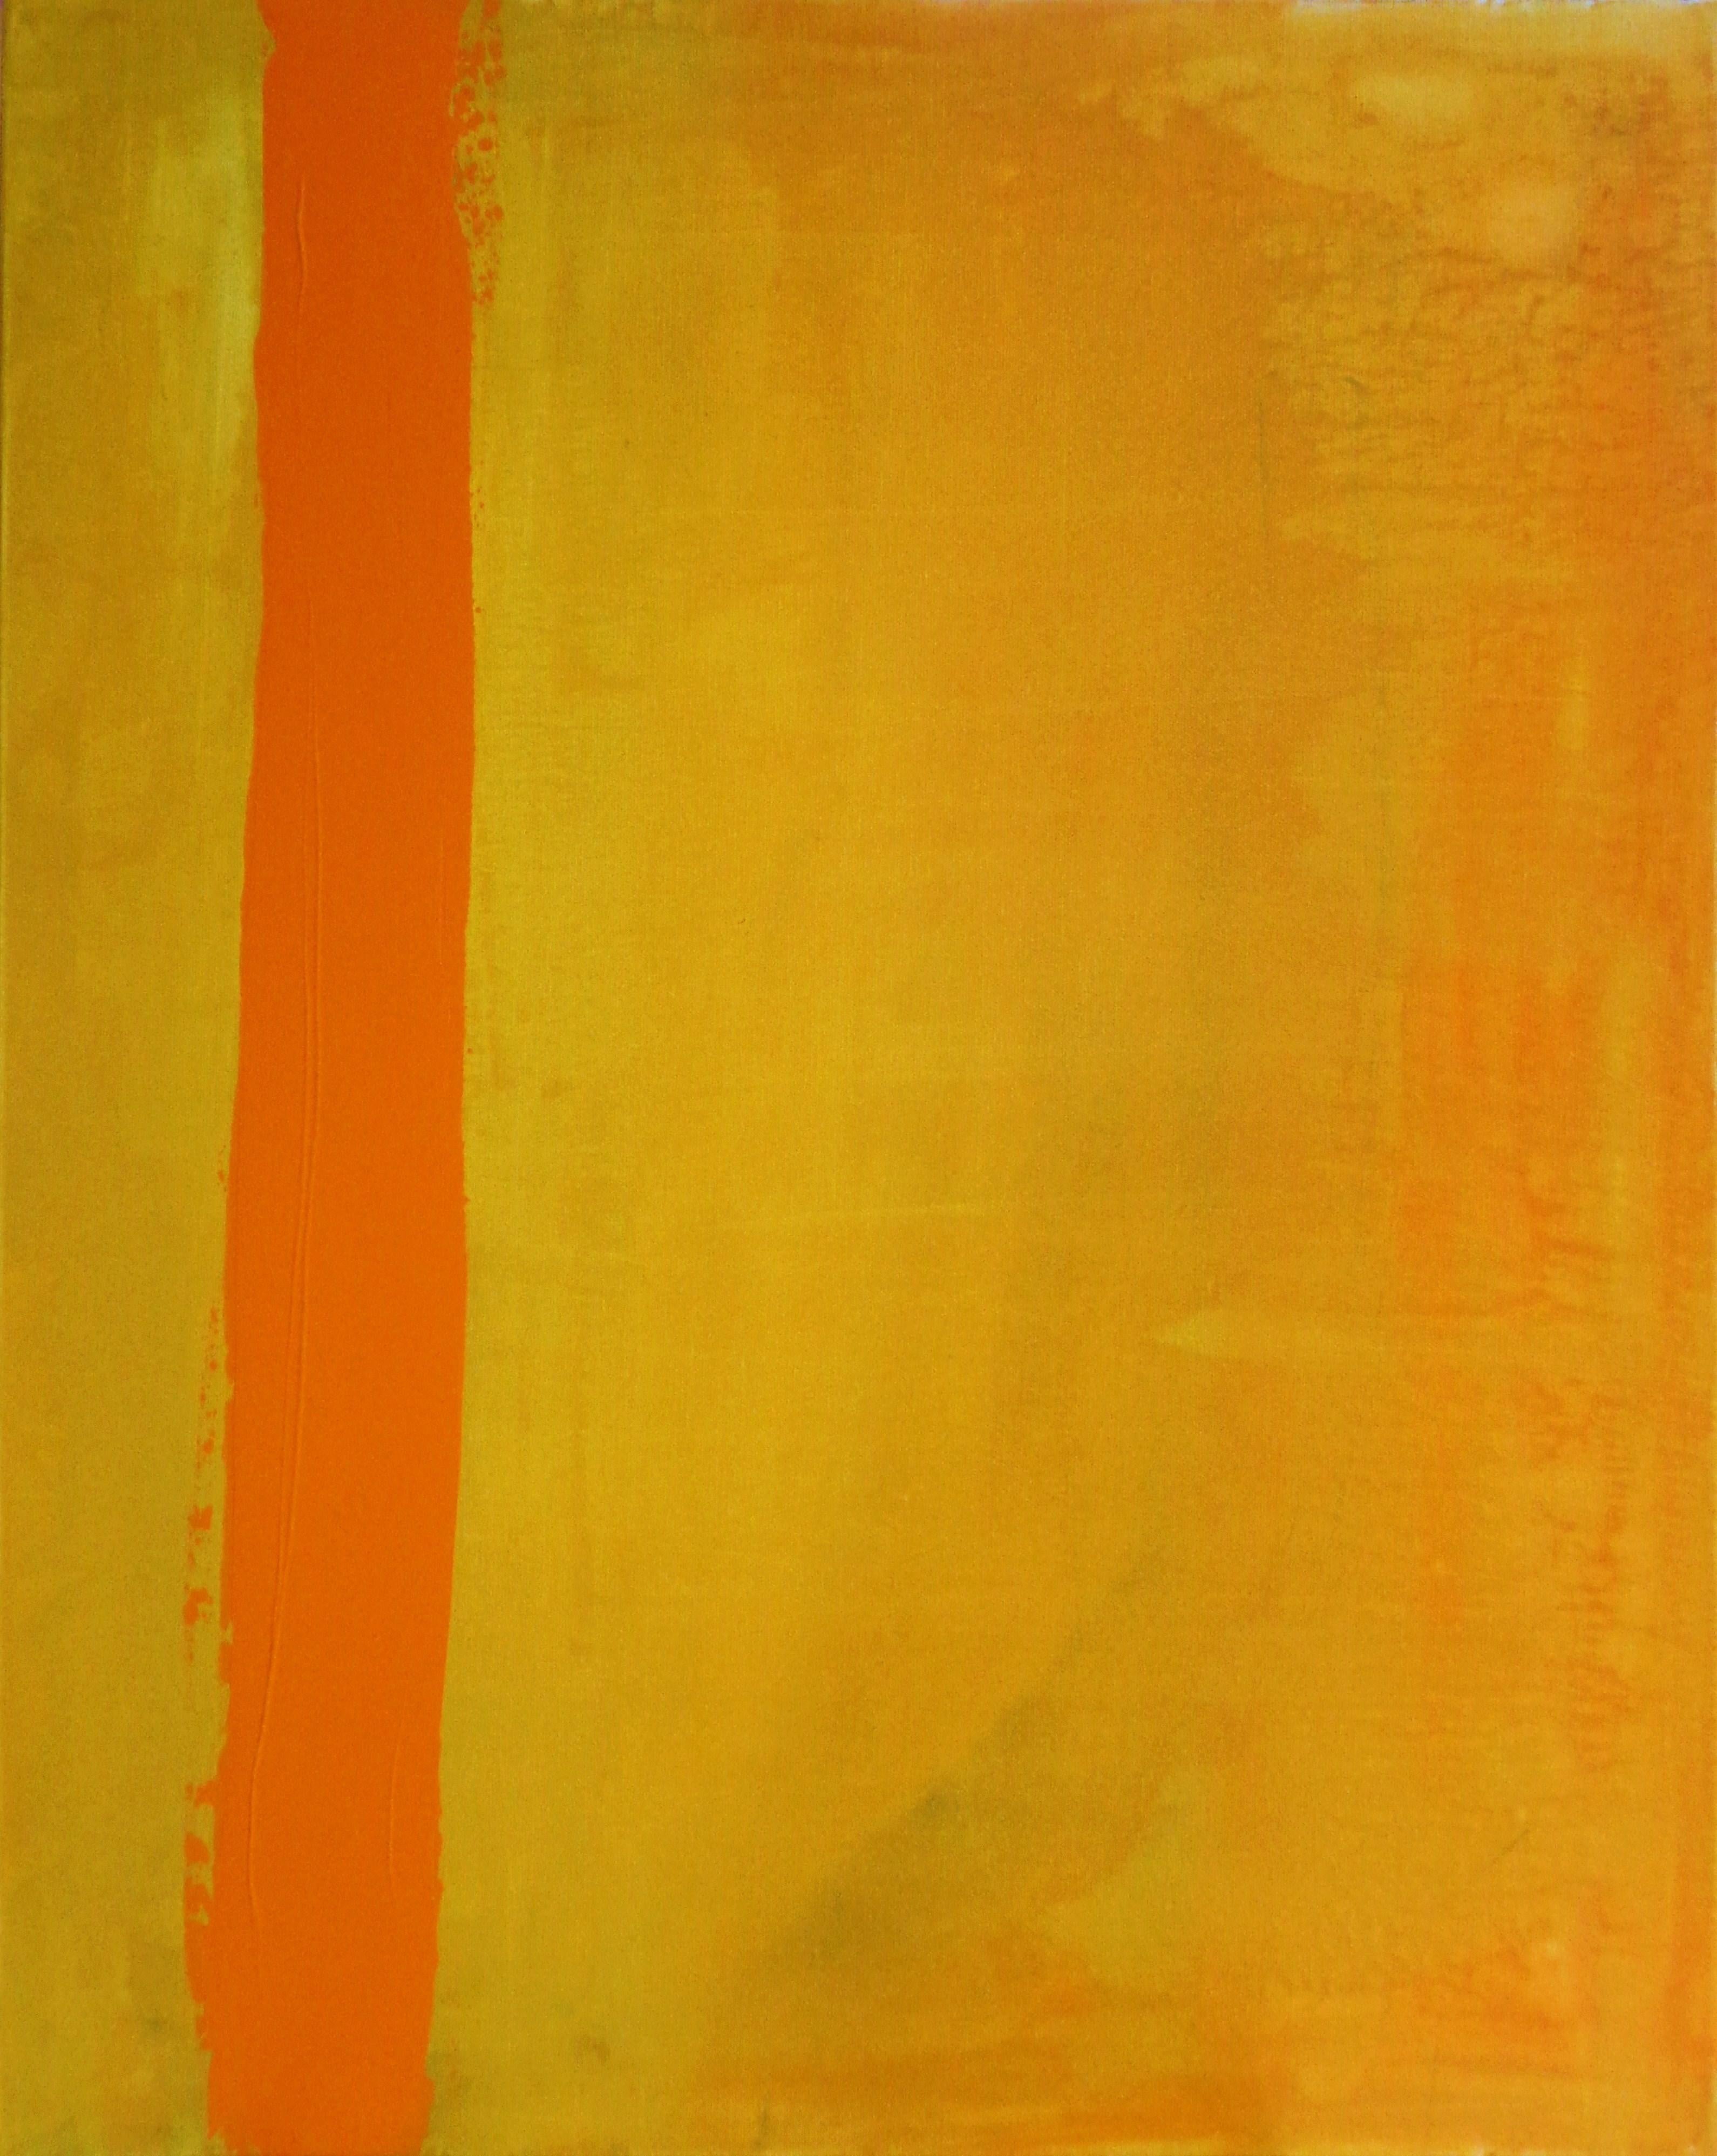 Life at the Orange Bar, Original Yellow & Orange Abstract Painting, 2017
30" x 24" x 1.5" (HxWxD)
Unframed, but comes "cloth-edged" (black) and ready to display with hanging wire

Artist Commentary:
From my growing body of Geometric Advanced Color